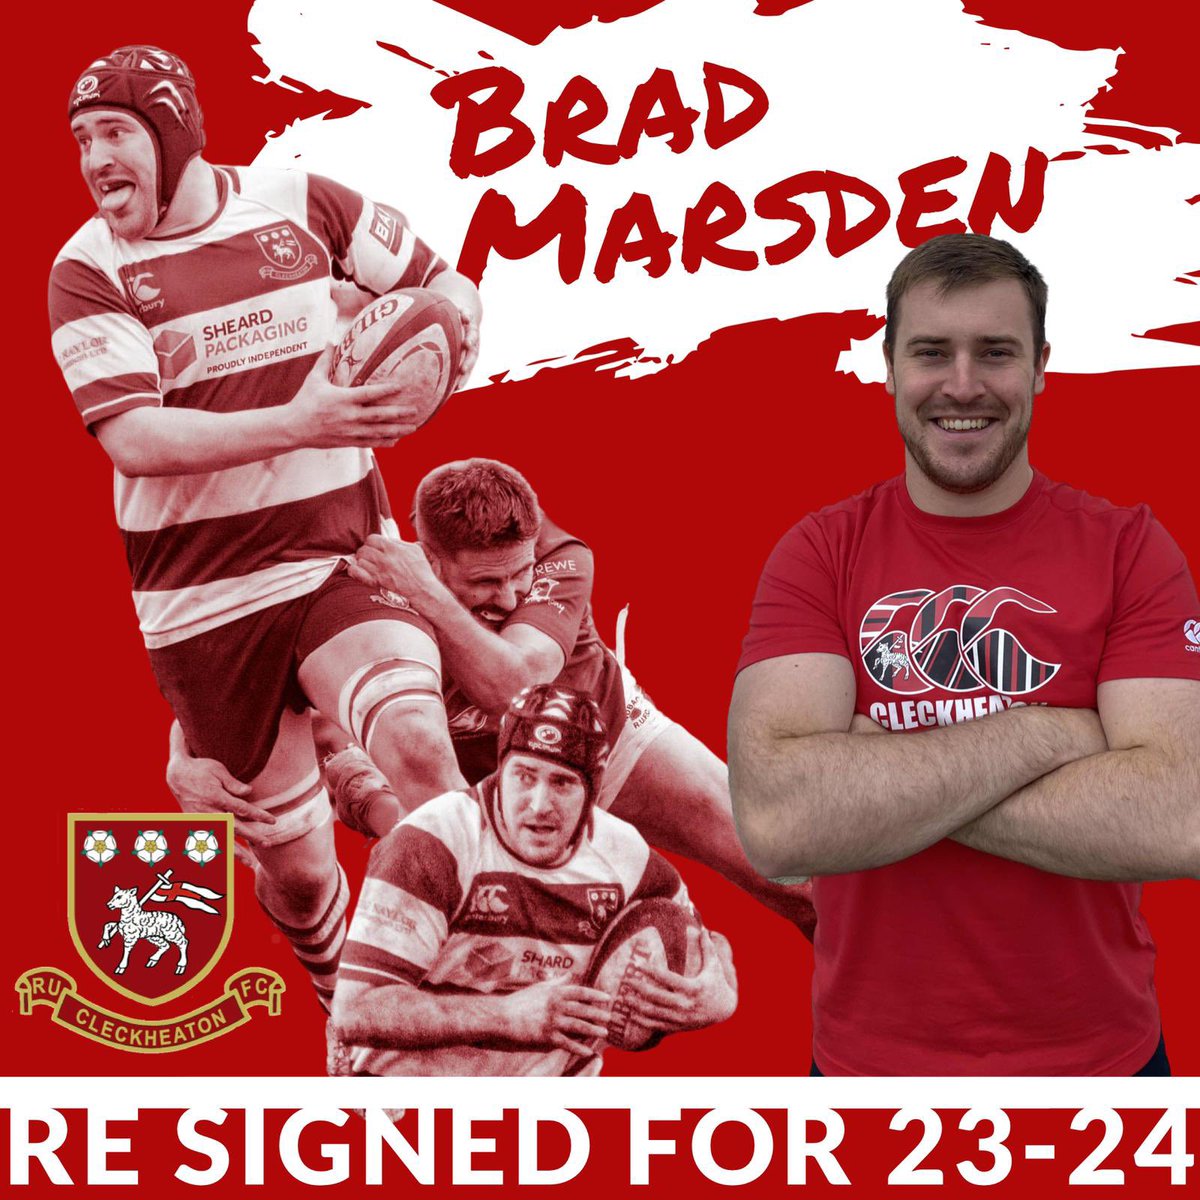 Last years lamb of steel @Brad_Marsden48 has re-signed for 23/24 🔴⚪️🔴⚪️